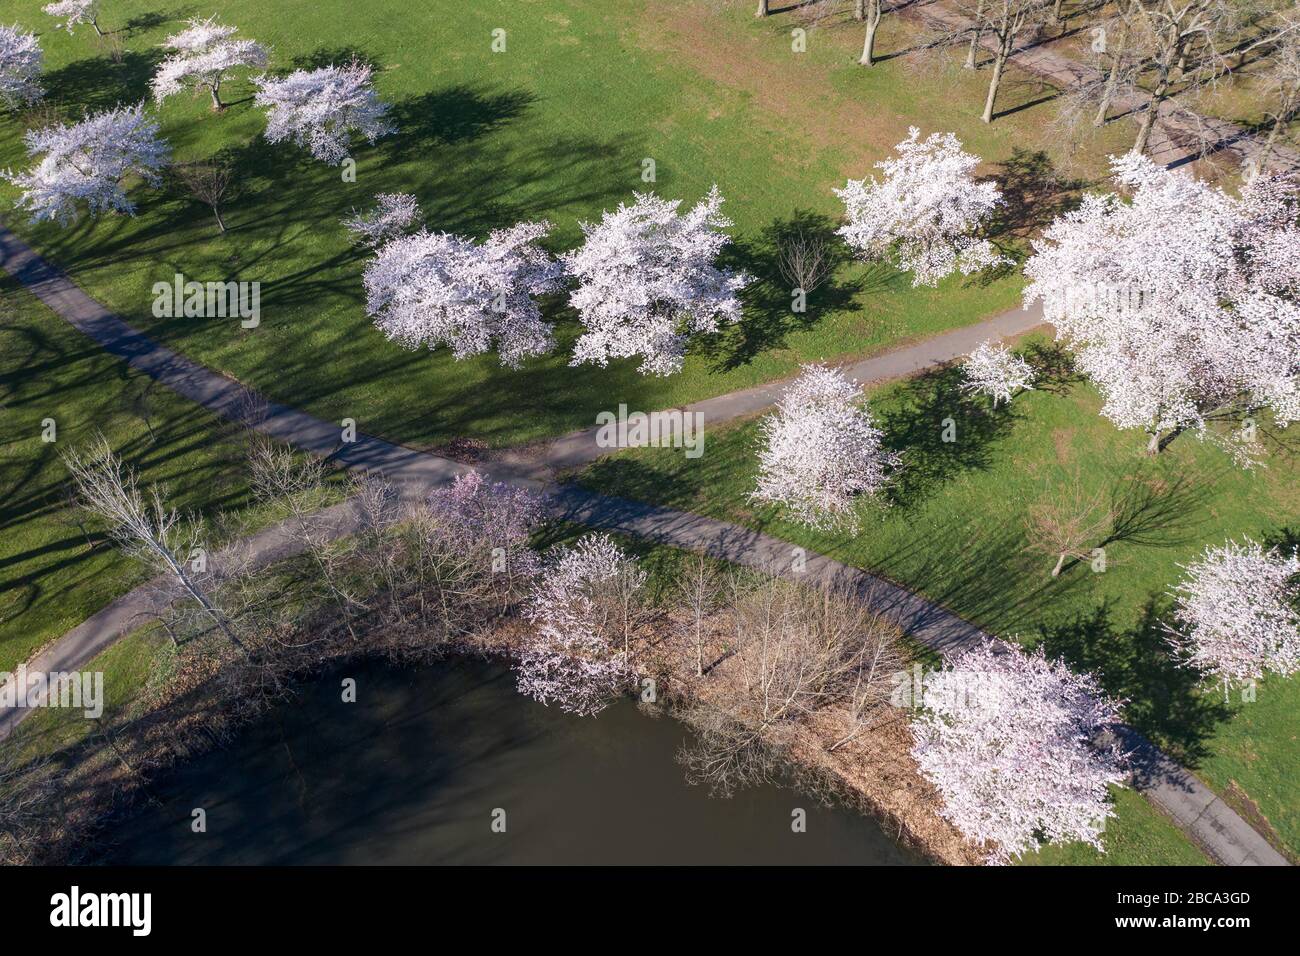 Aerial view of cherry trees in full bloom surrounding a pond with pretty pink blossoms. Stock Photo